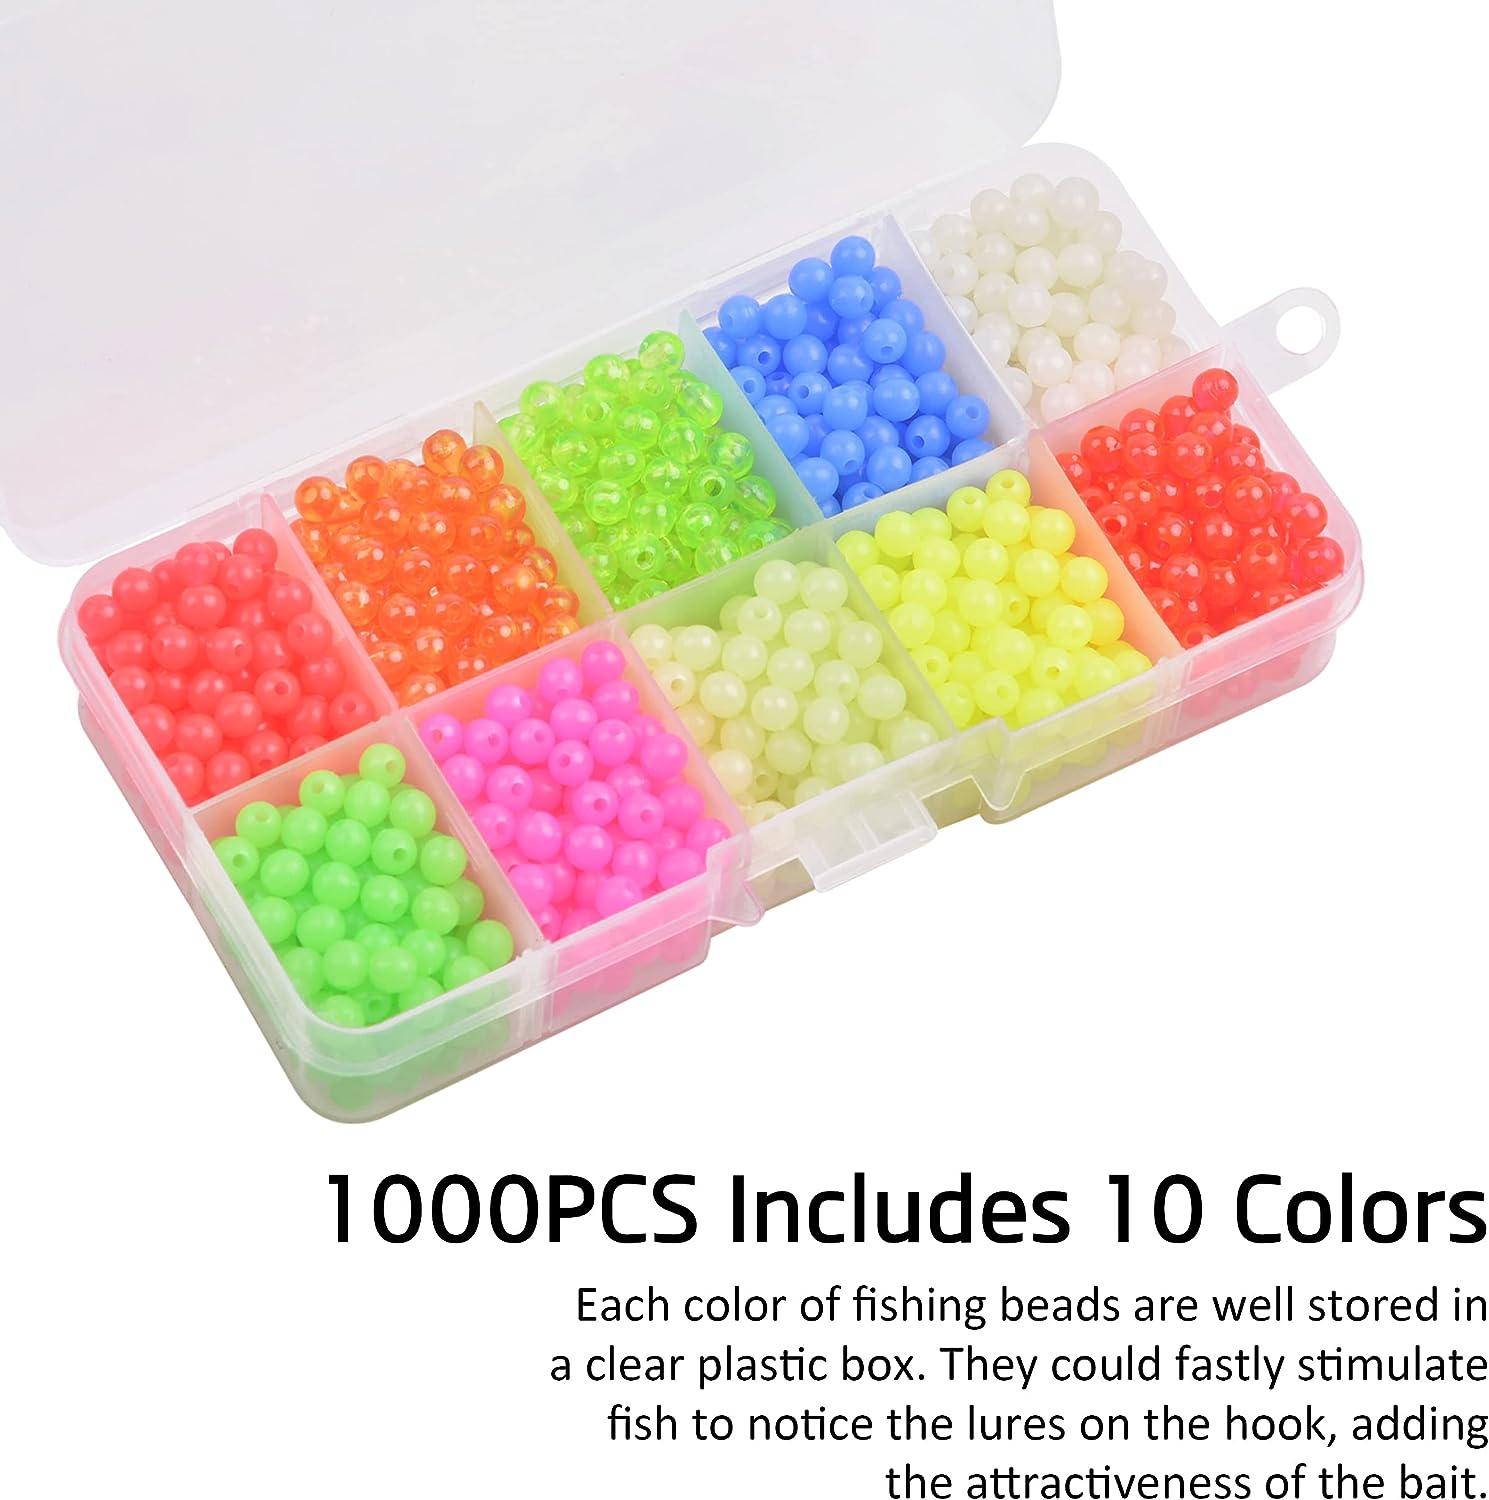 OROOTL Fishing Beads Assorted Kit - 1000pcs 5mm Round Float Glow